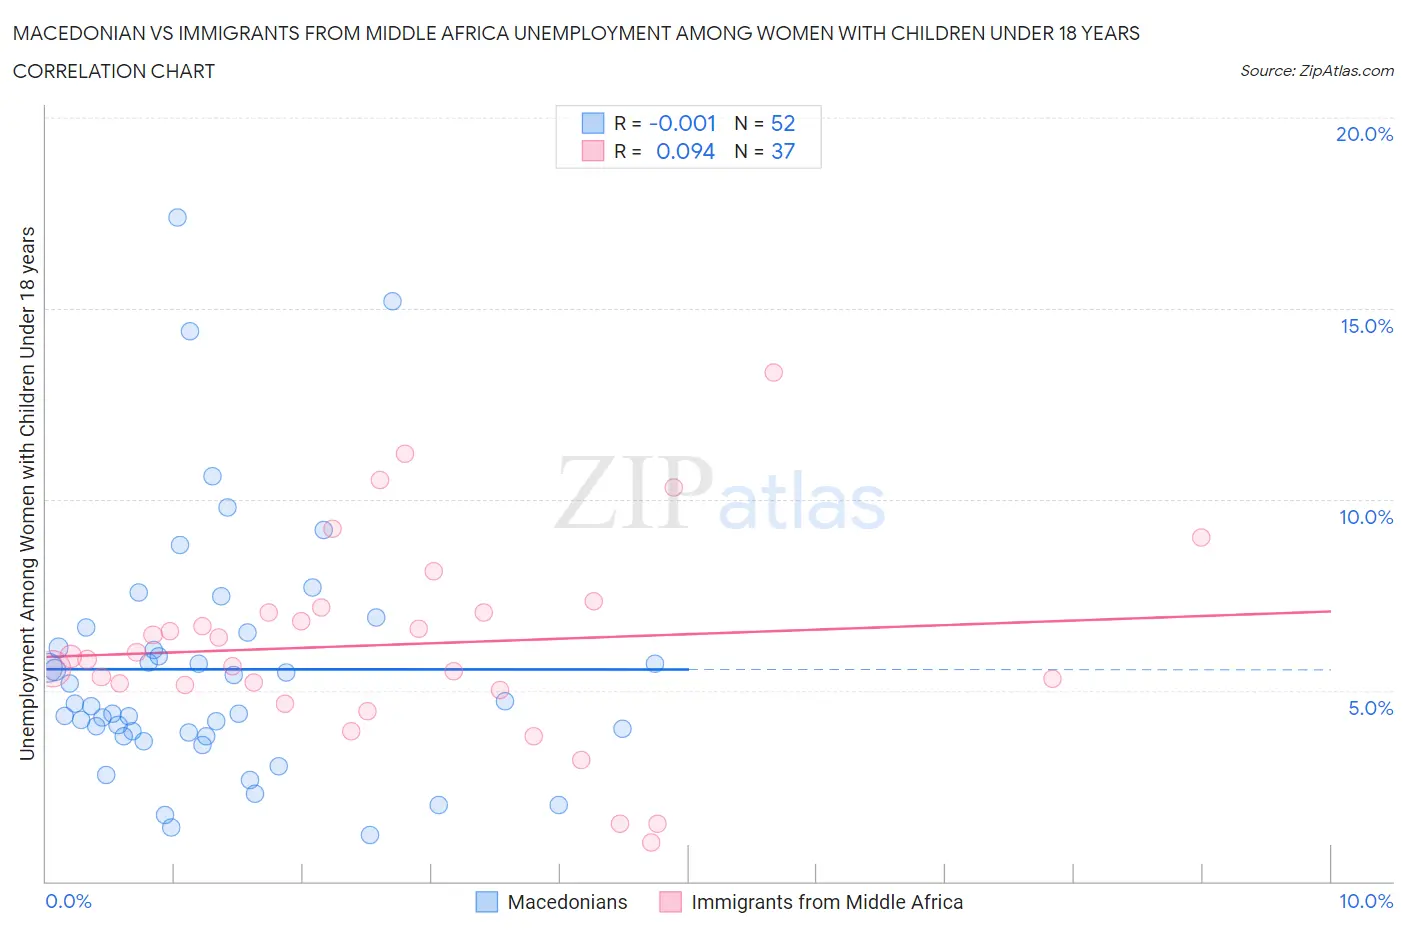 Macedonian vs Immigrants from Middle Africa Unemployment Among Women with Children Under 18 years